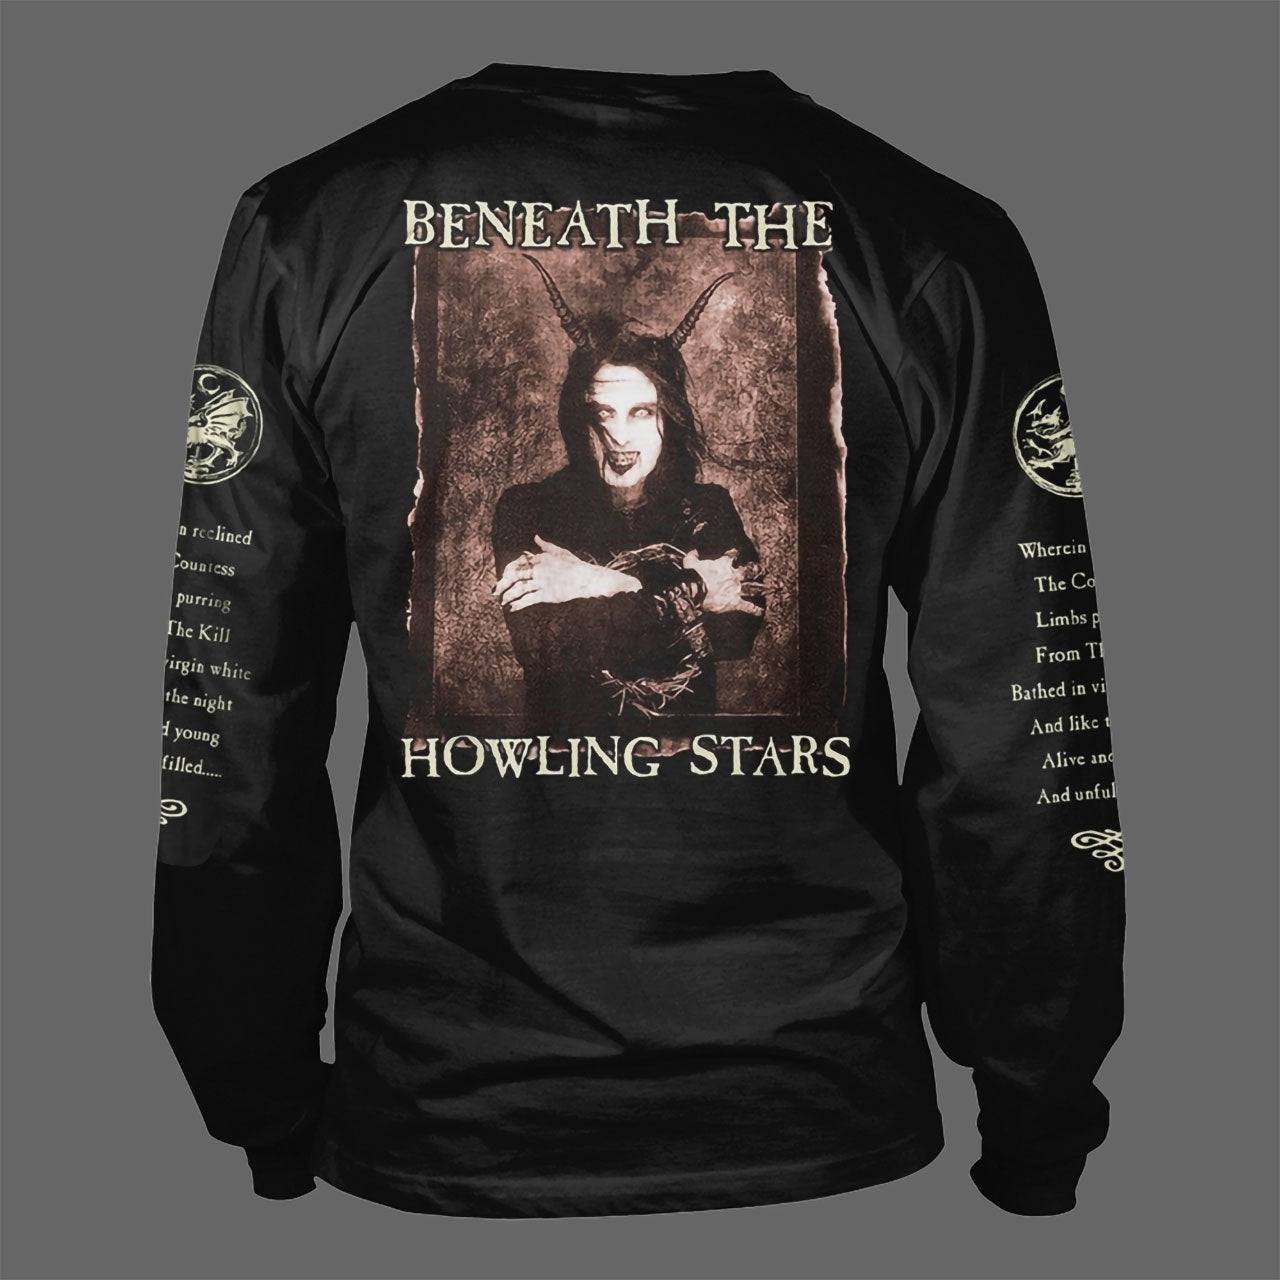 Cradle of Filth - Cruelty and the Beast (Long Sleeve T-Shirt)